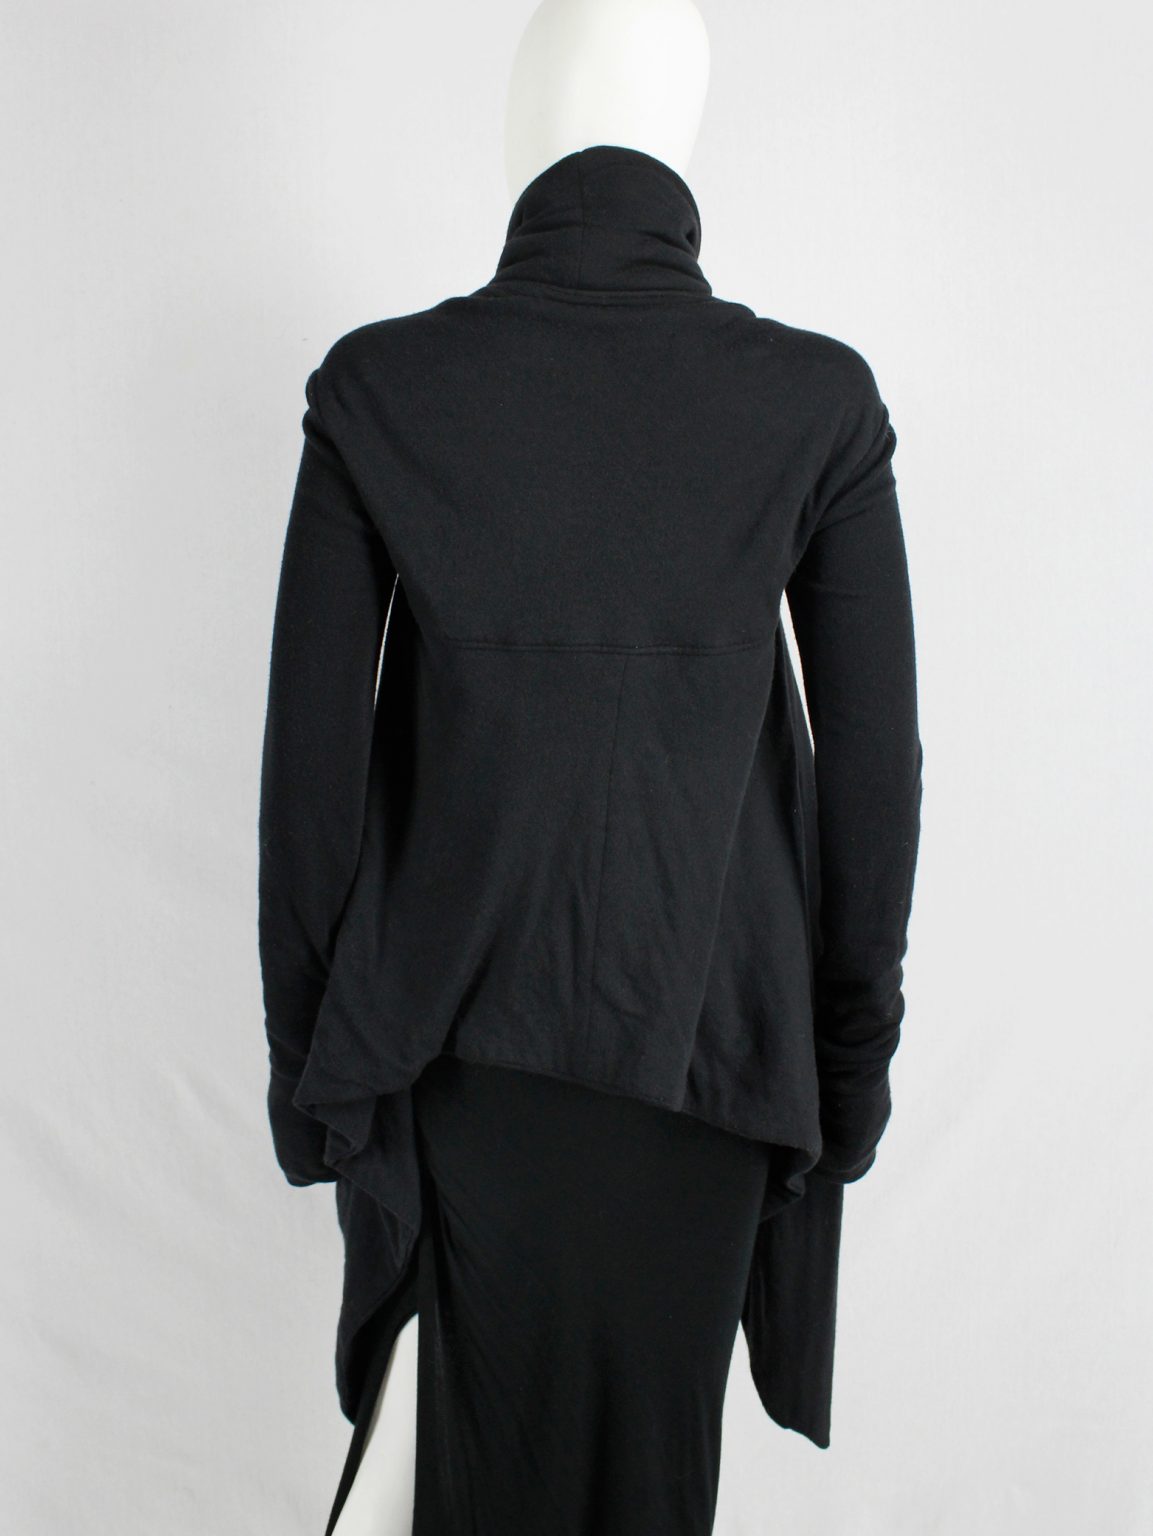 Rick Owens lilies black draped coat with tie front and triangular stitched panels